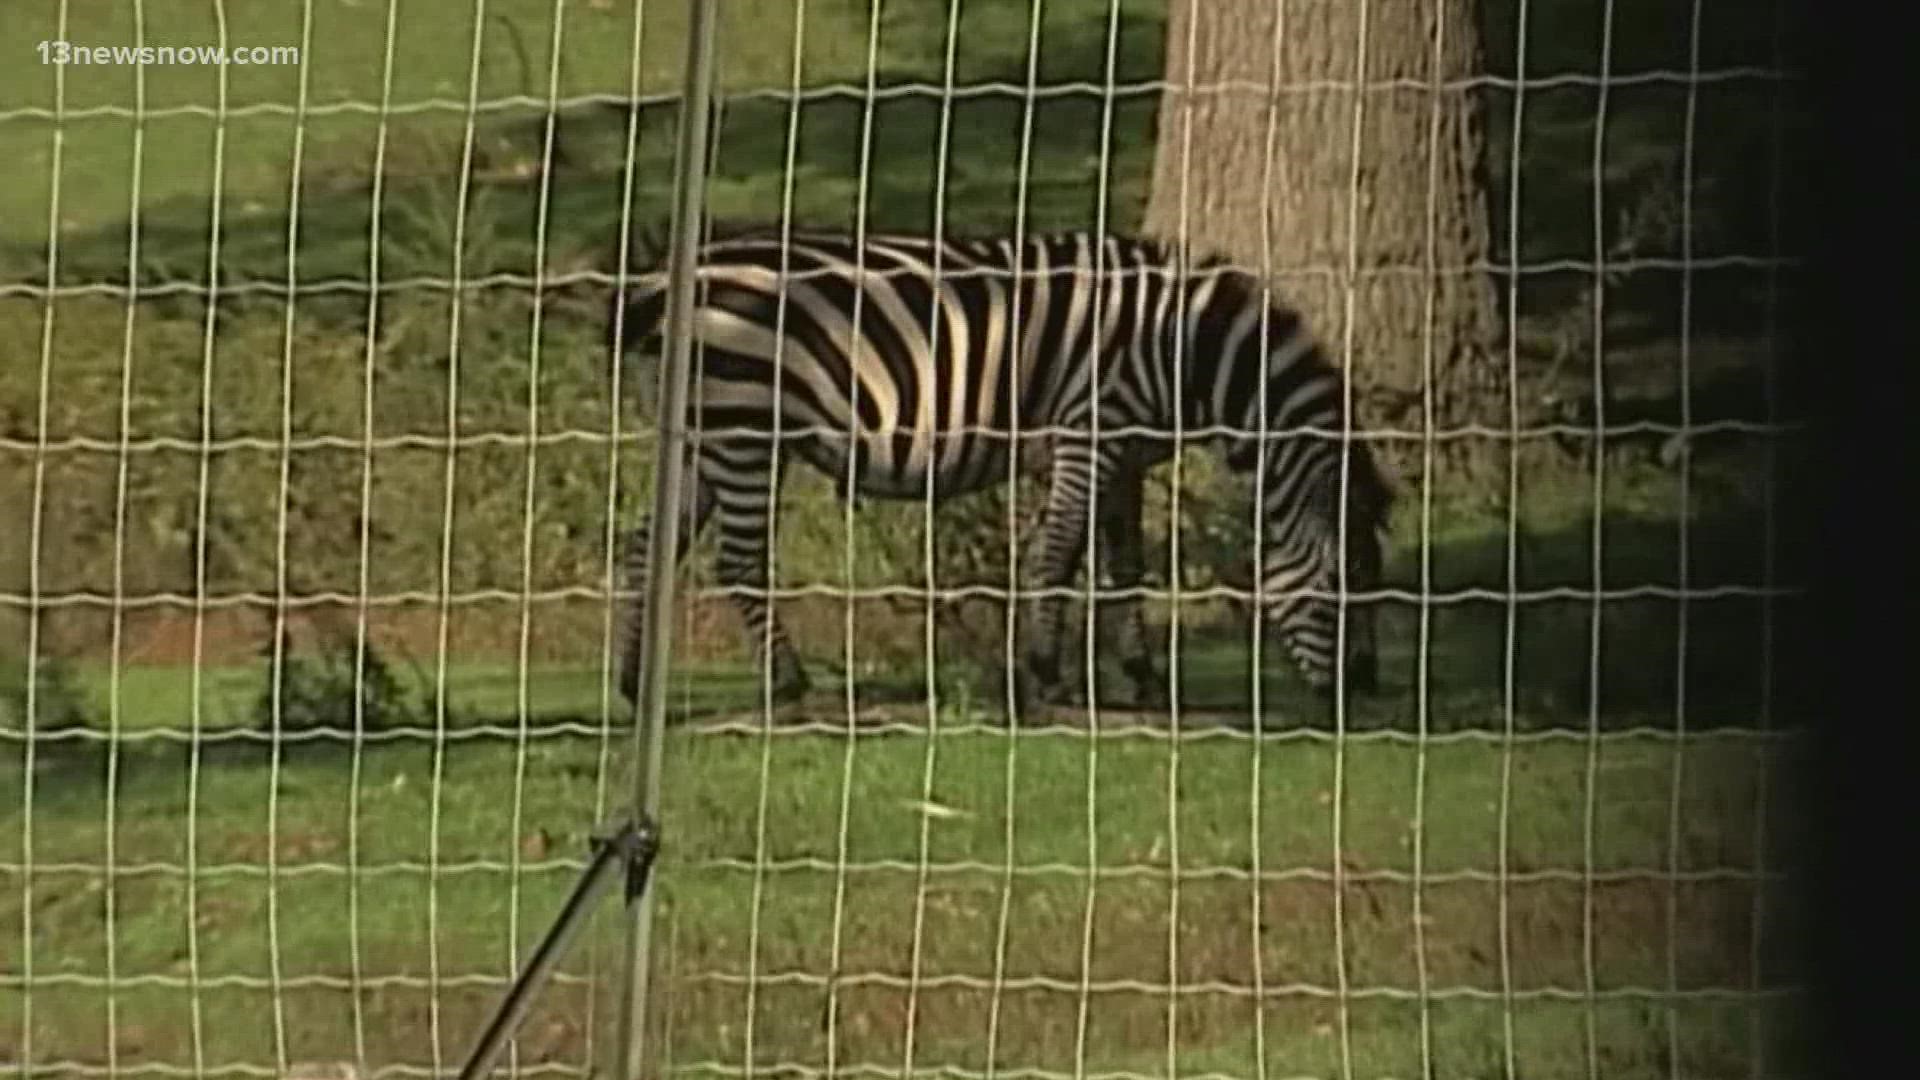 Nearly two decades ago this week, Zeke the Zebra made national headlines after roughing up a lion at the Norfolk zoo.